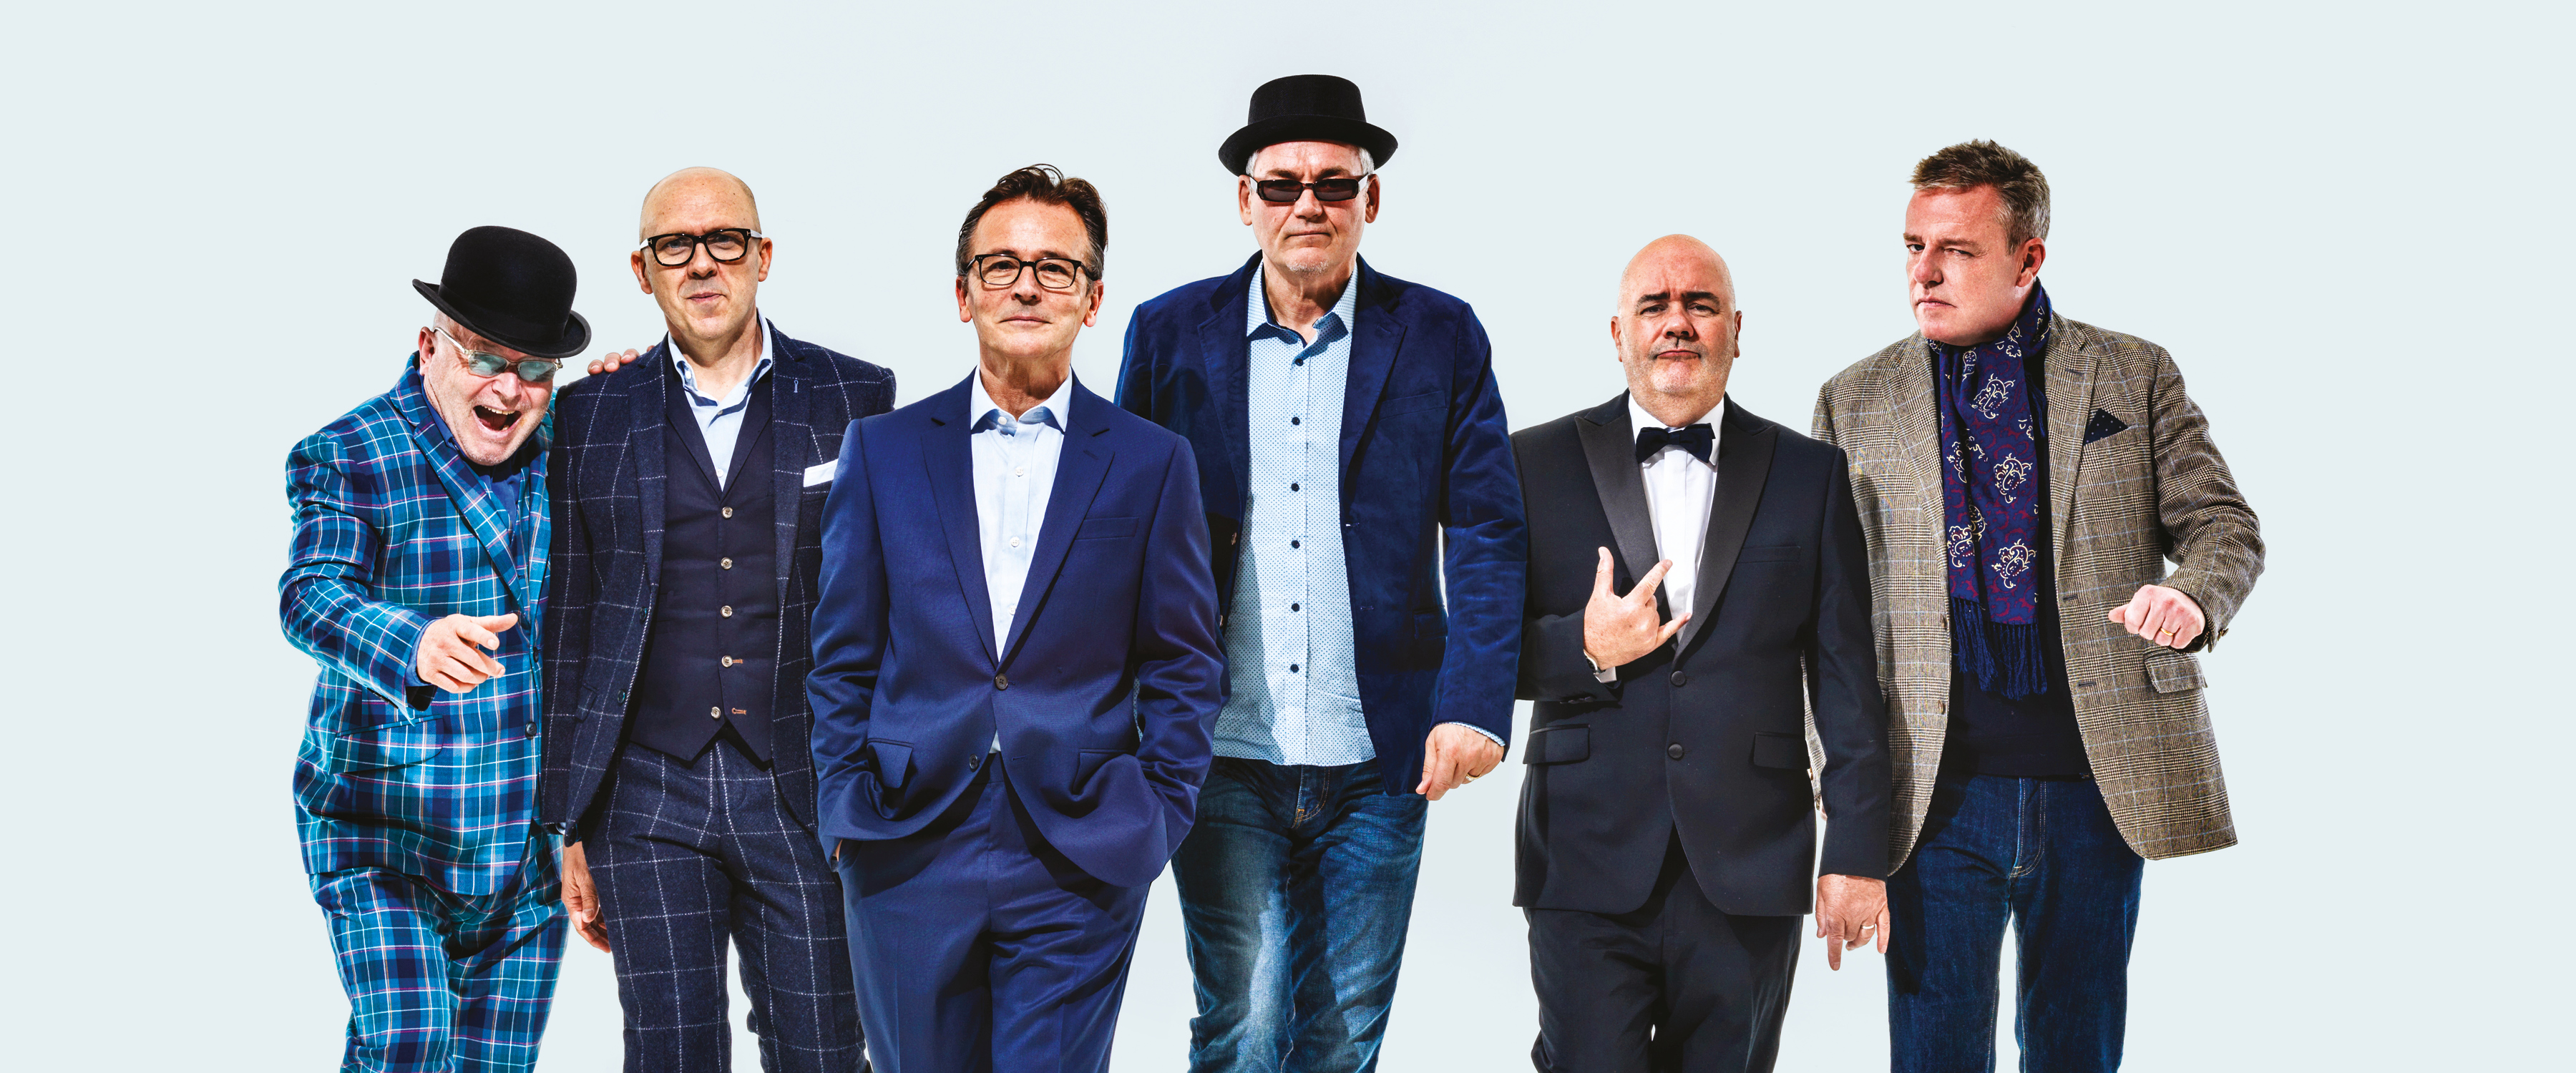 madness-announce-forest-live-shows-for-the-summer-forestry-england